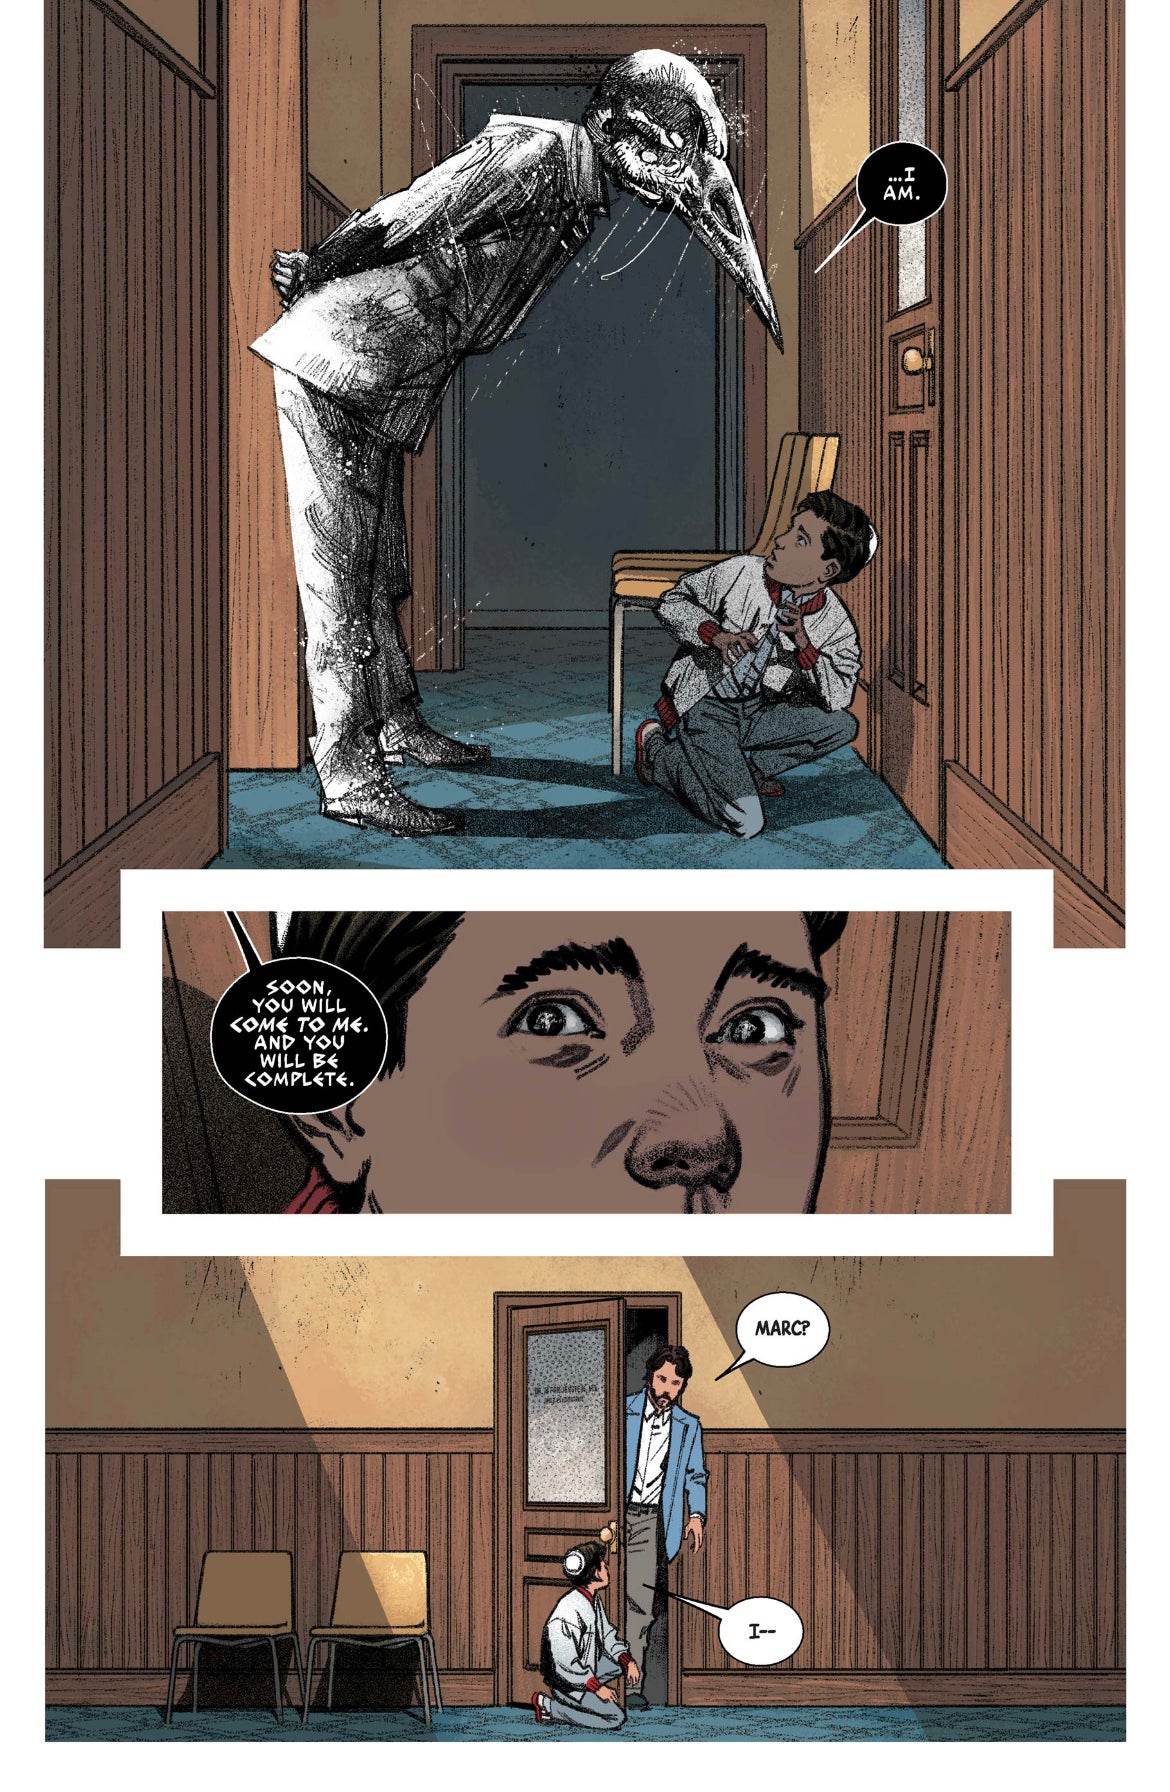 Moon Knight #10 by Jeff Lemire, Greg Smallwood, Jordie Bellaire, and Cory Petit